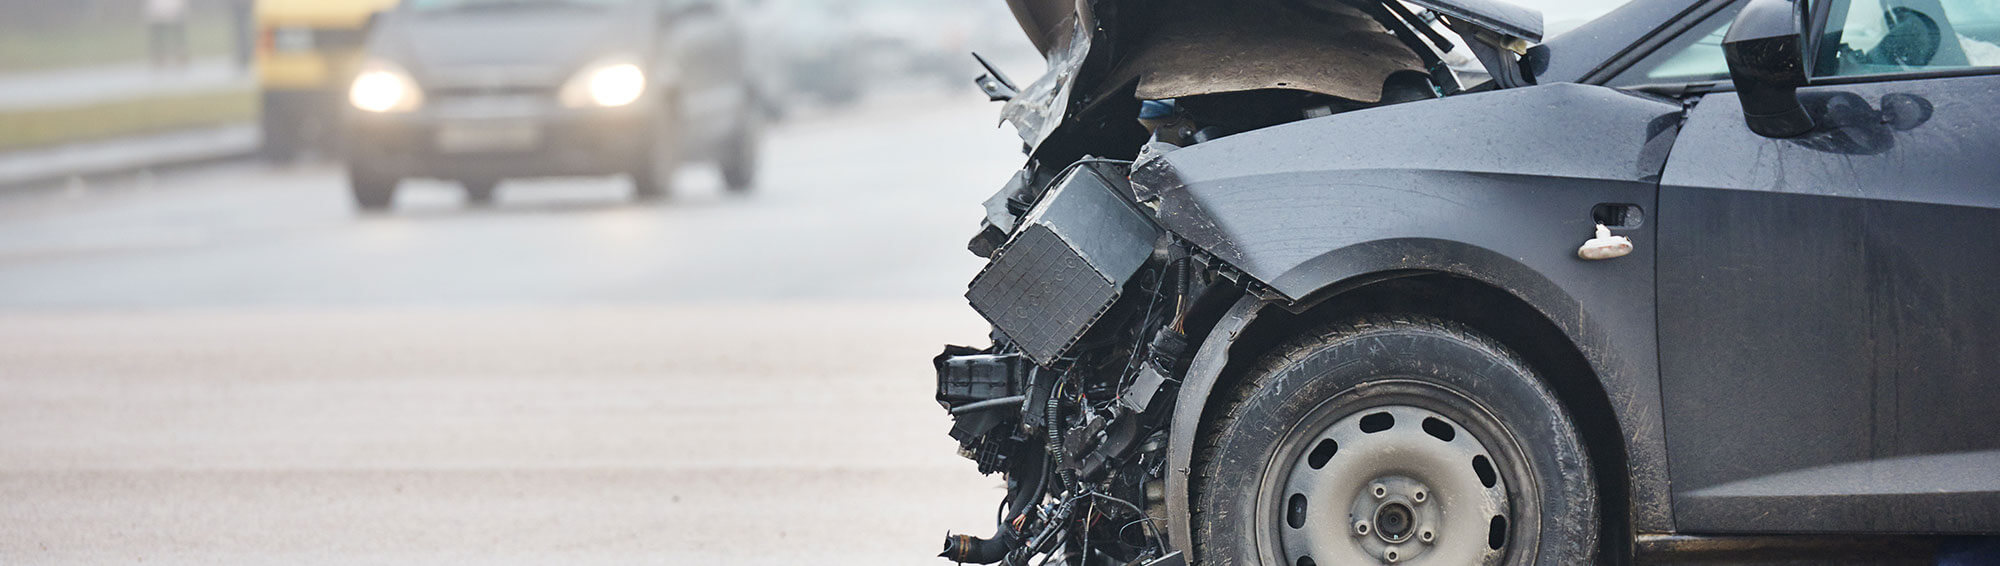 What Types of Negligence Contribute to Auto Accidents?